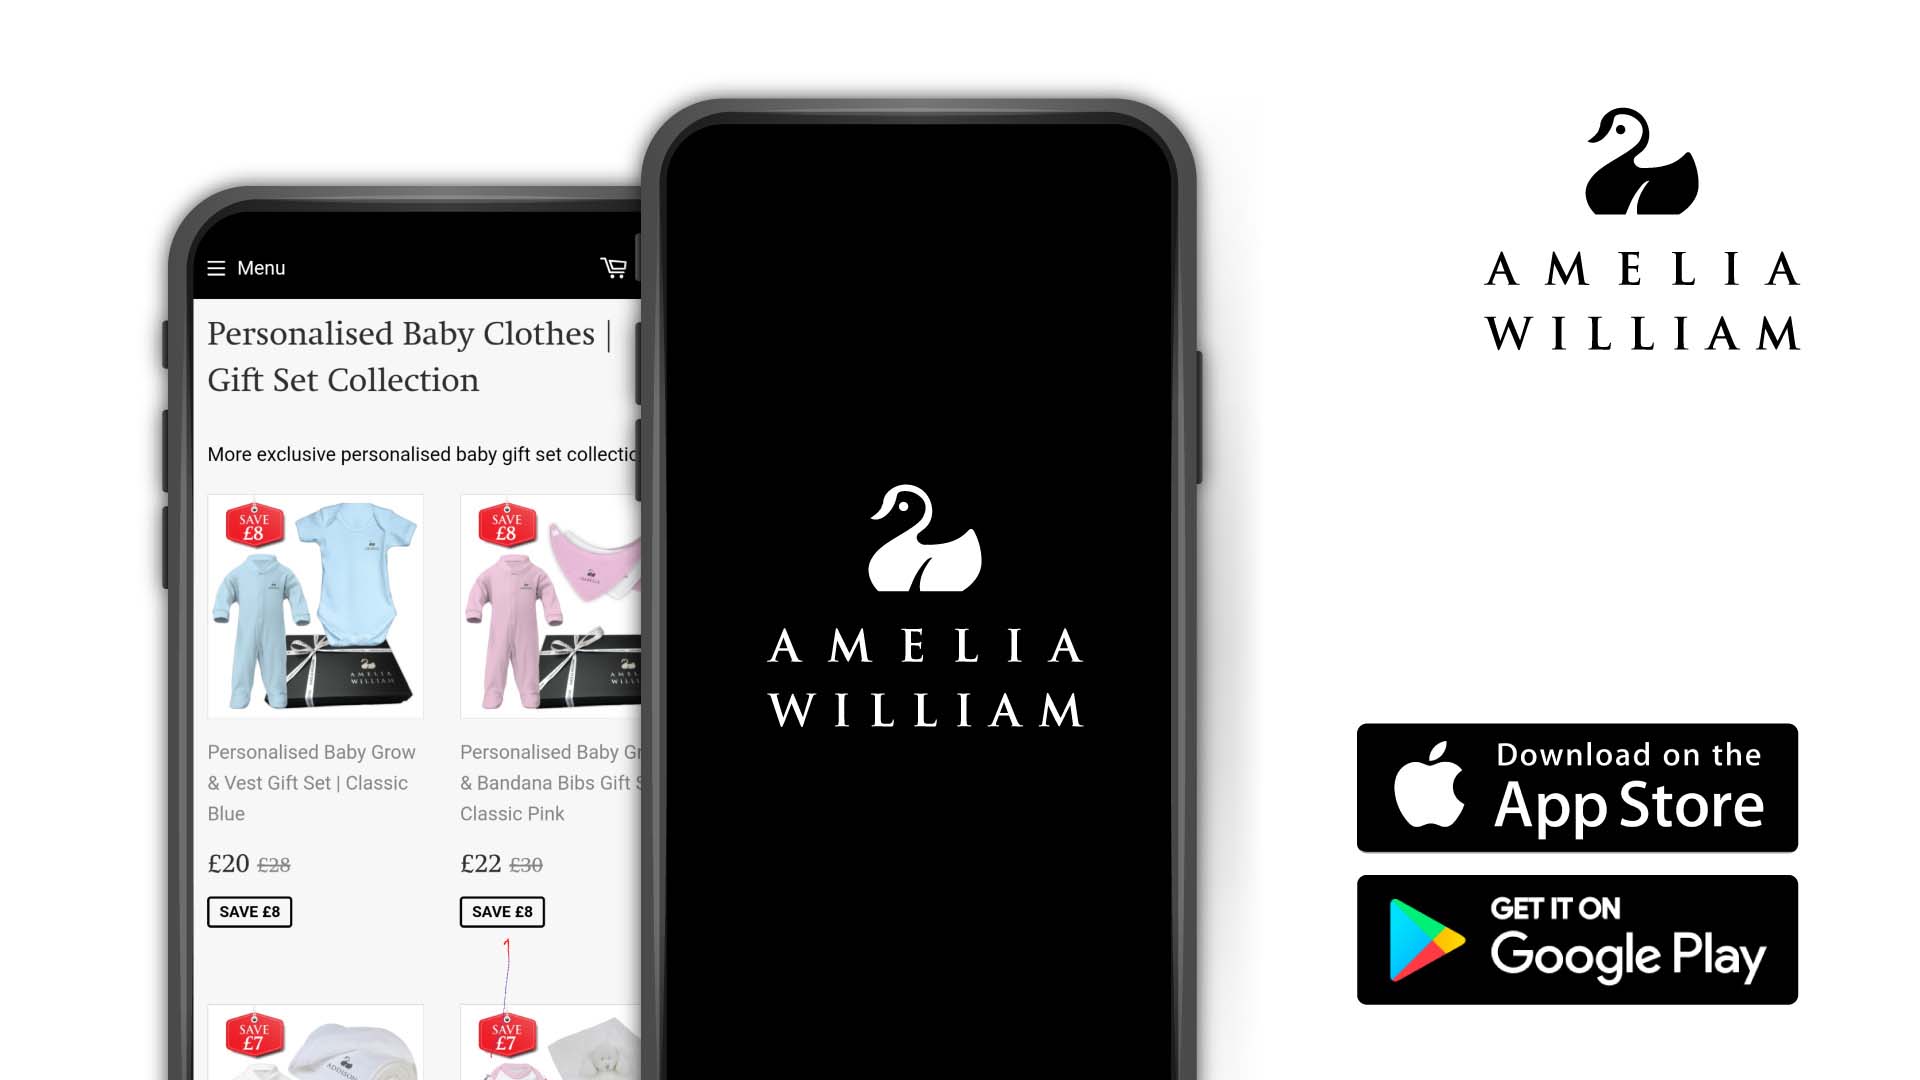 The Amelia William Personlised Baby Clothes App brought to you by Identity Pixel - App Design & Development in Essex